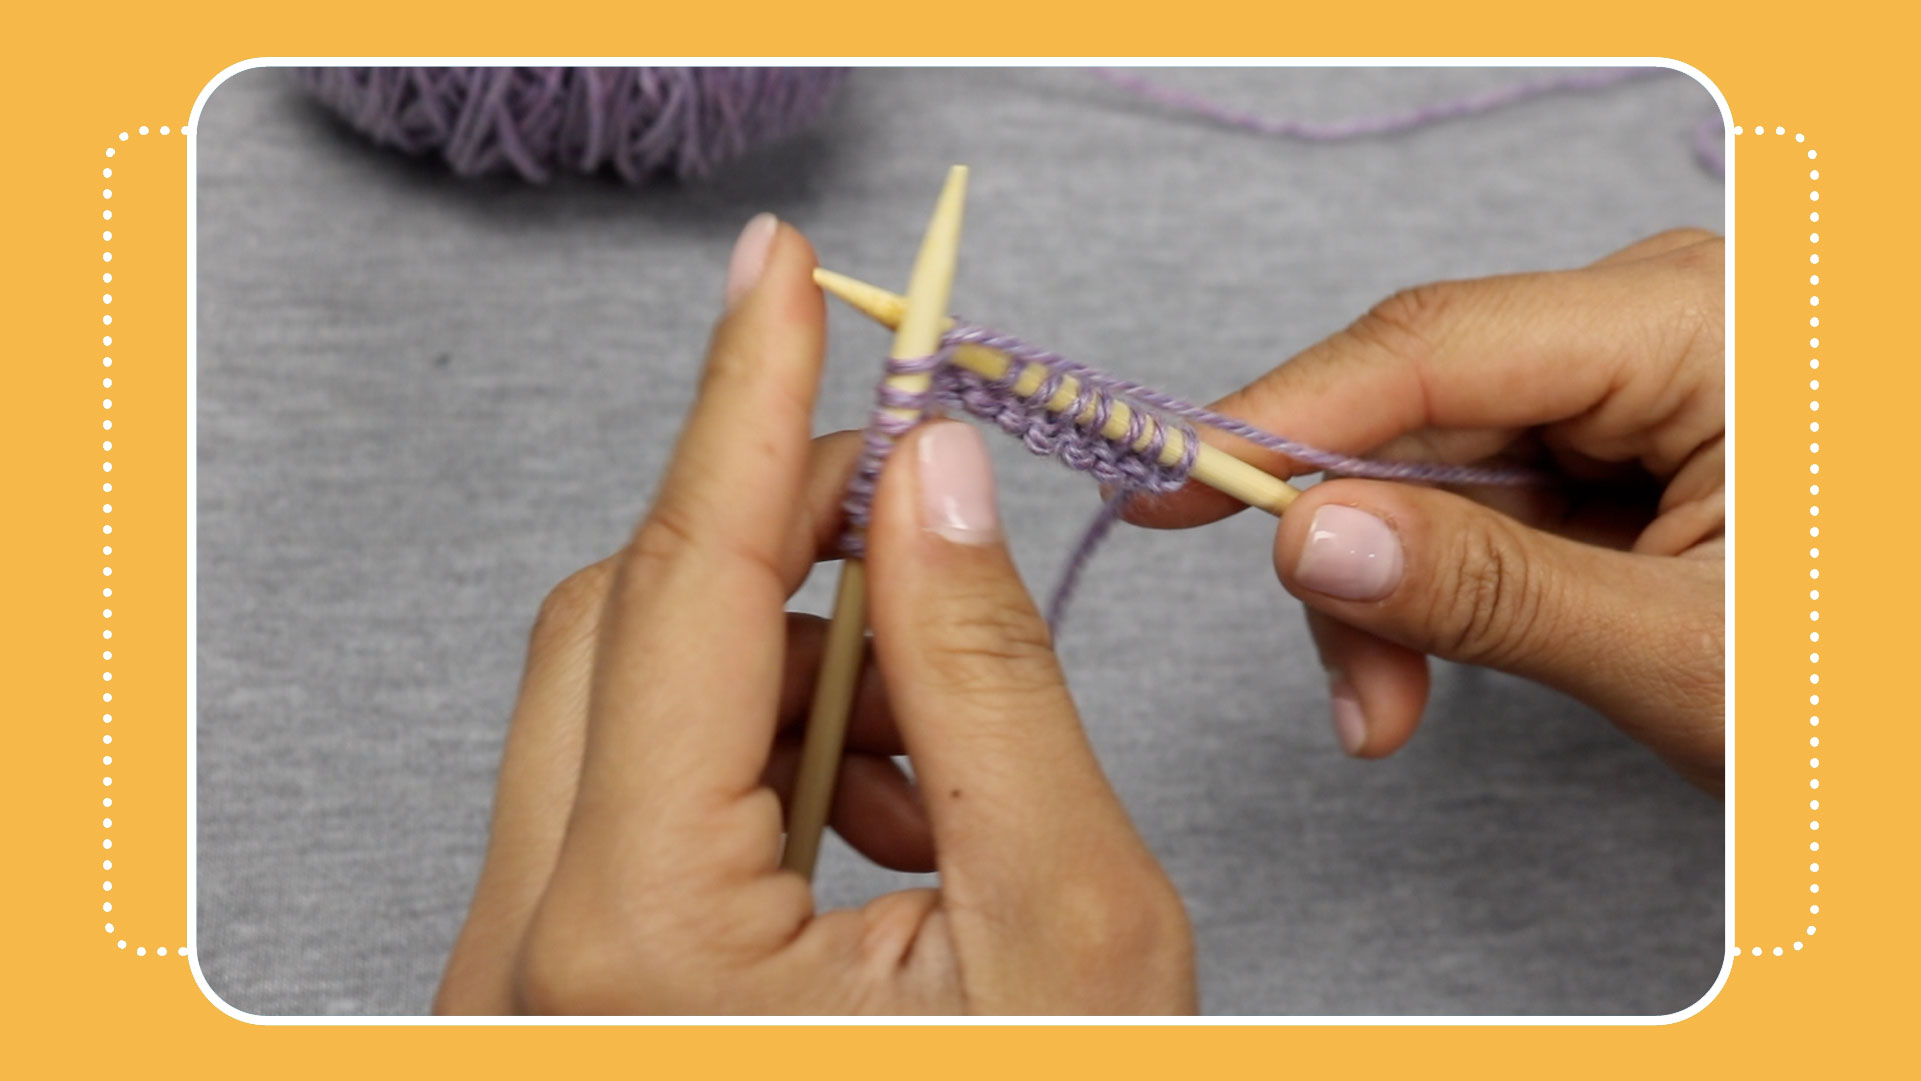 how to knit free video tutorial by crafty gemini